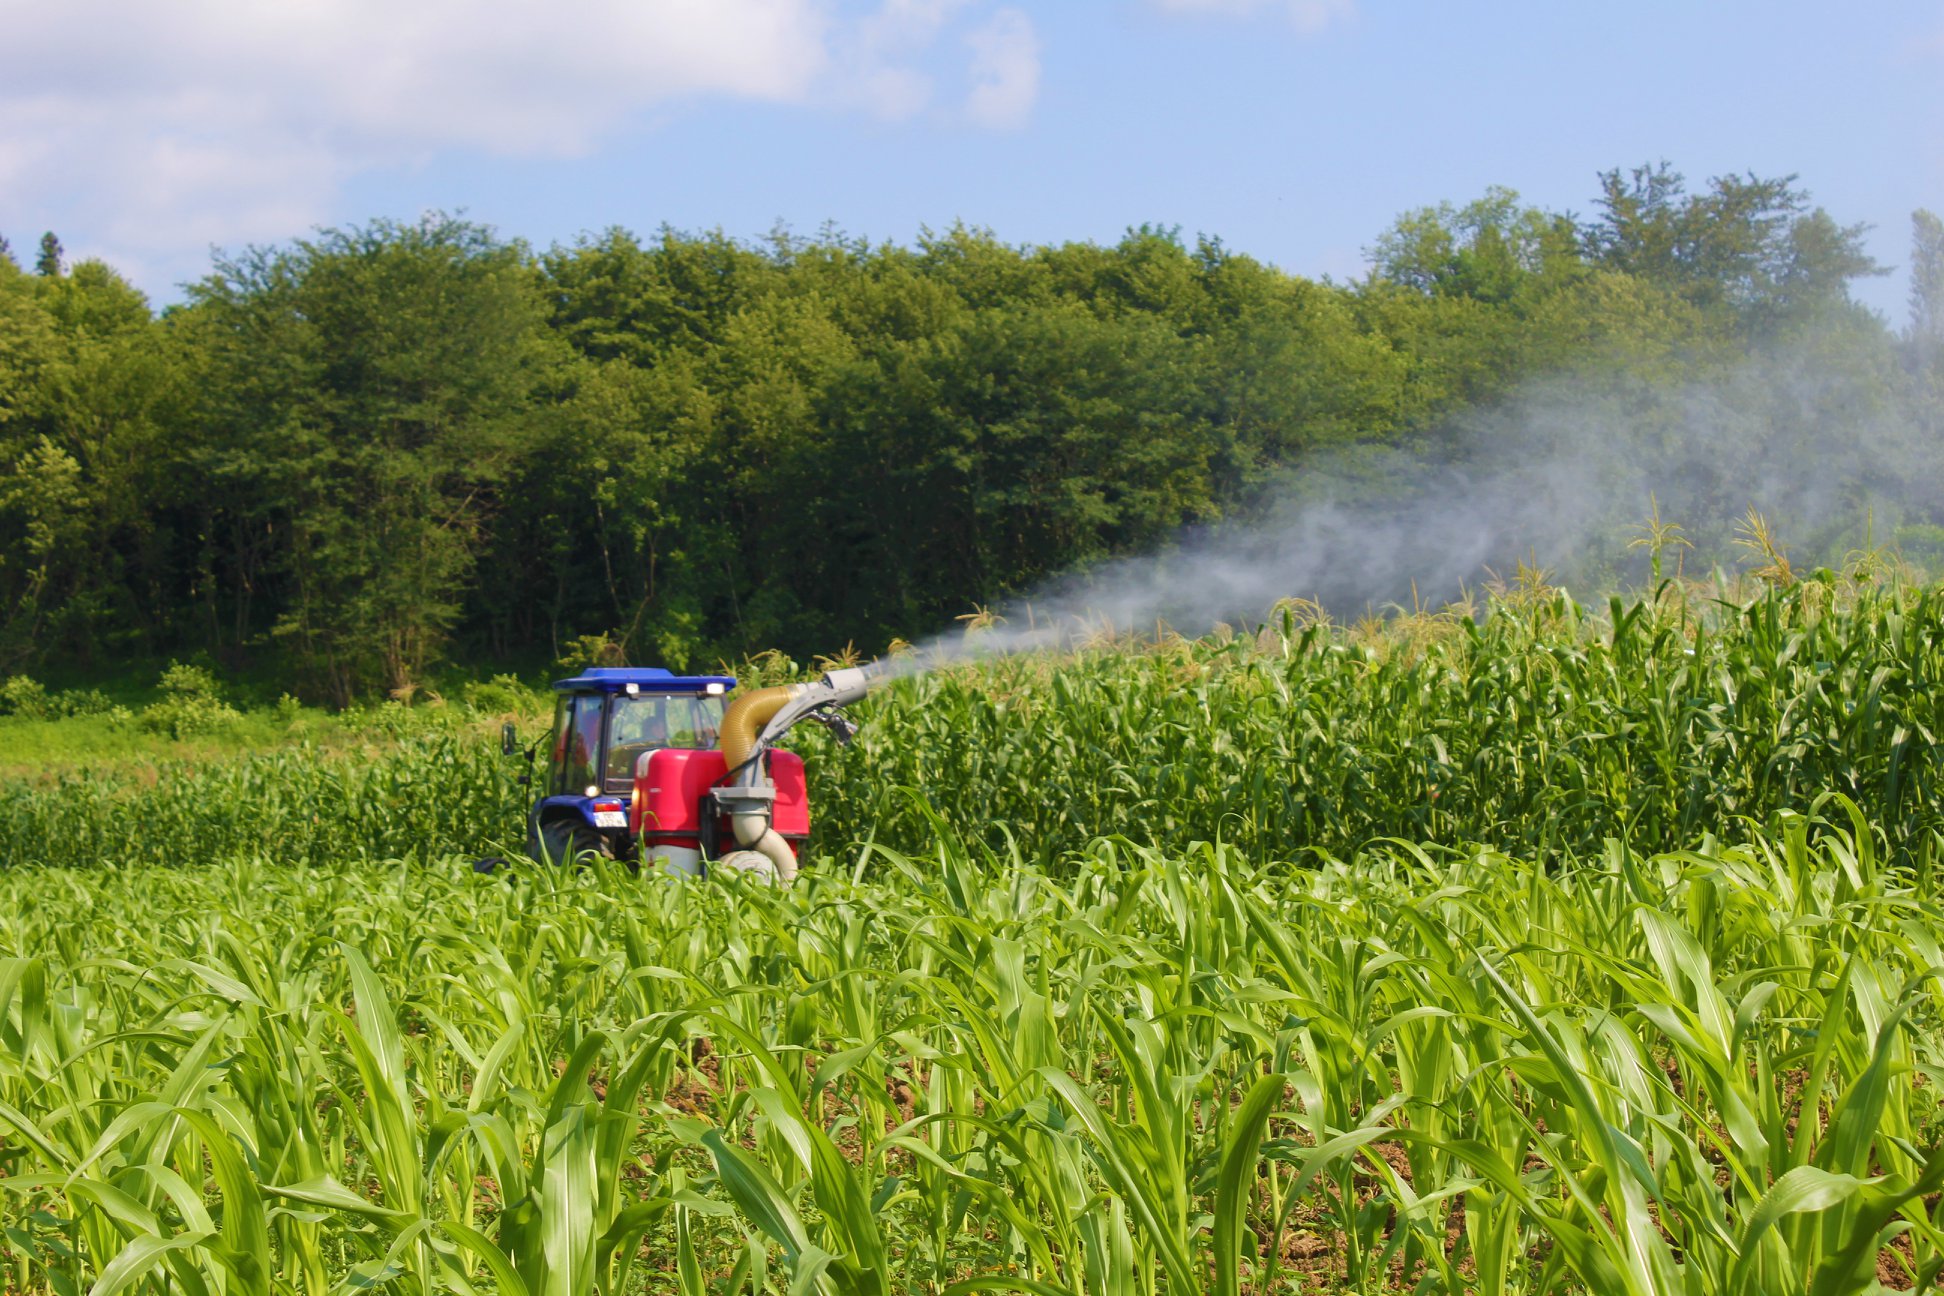 As part of the measures against BMSB, the areas surrounding corn fields are treated with cold spraying technology